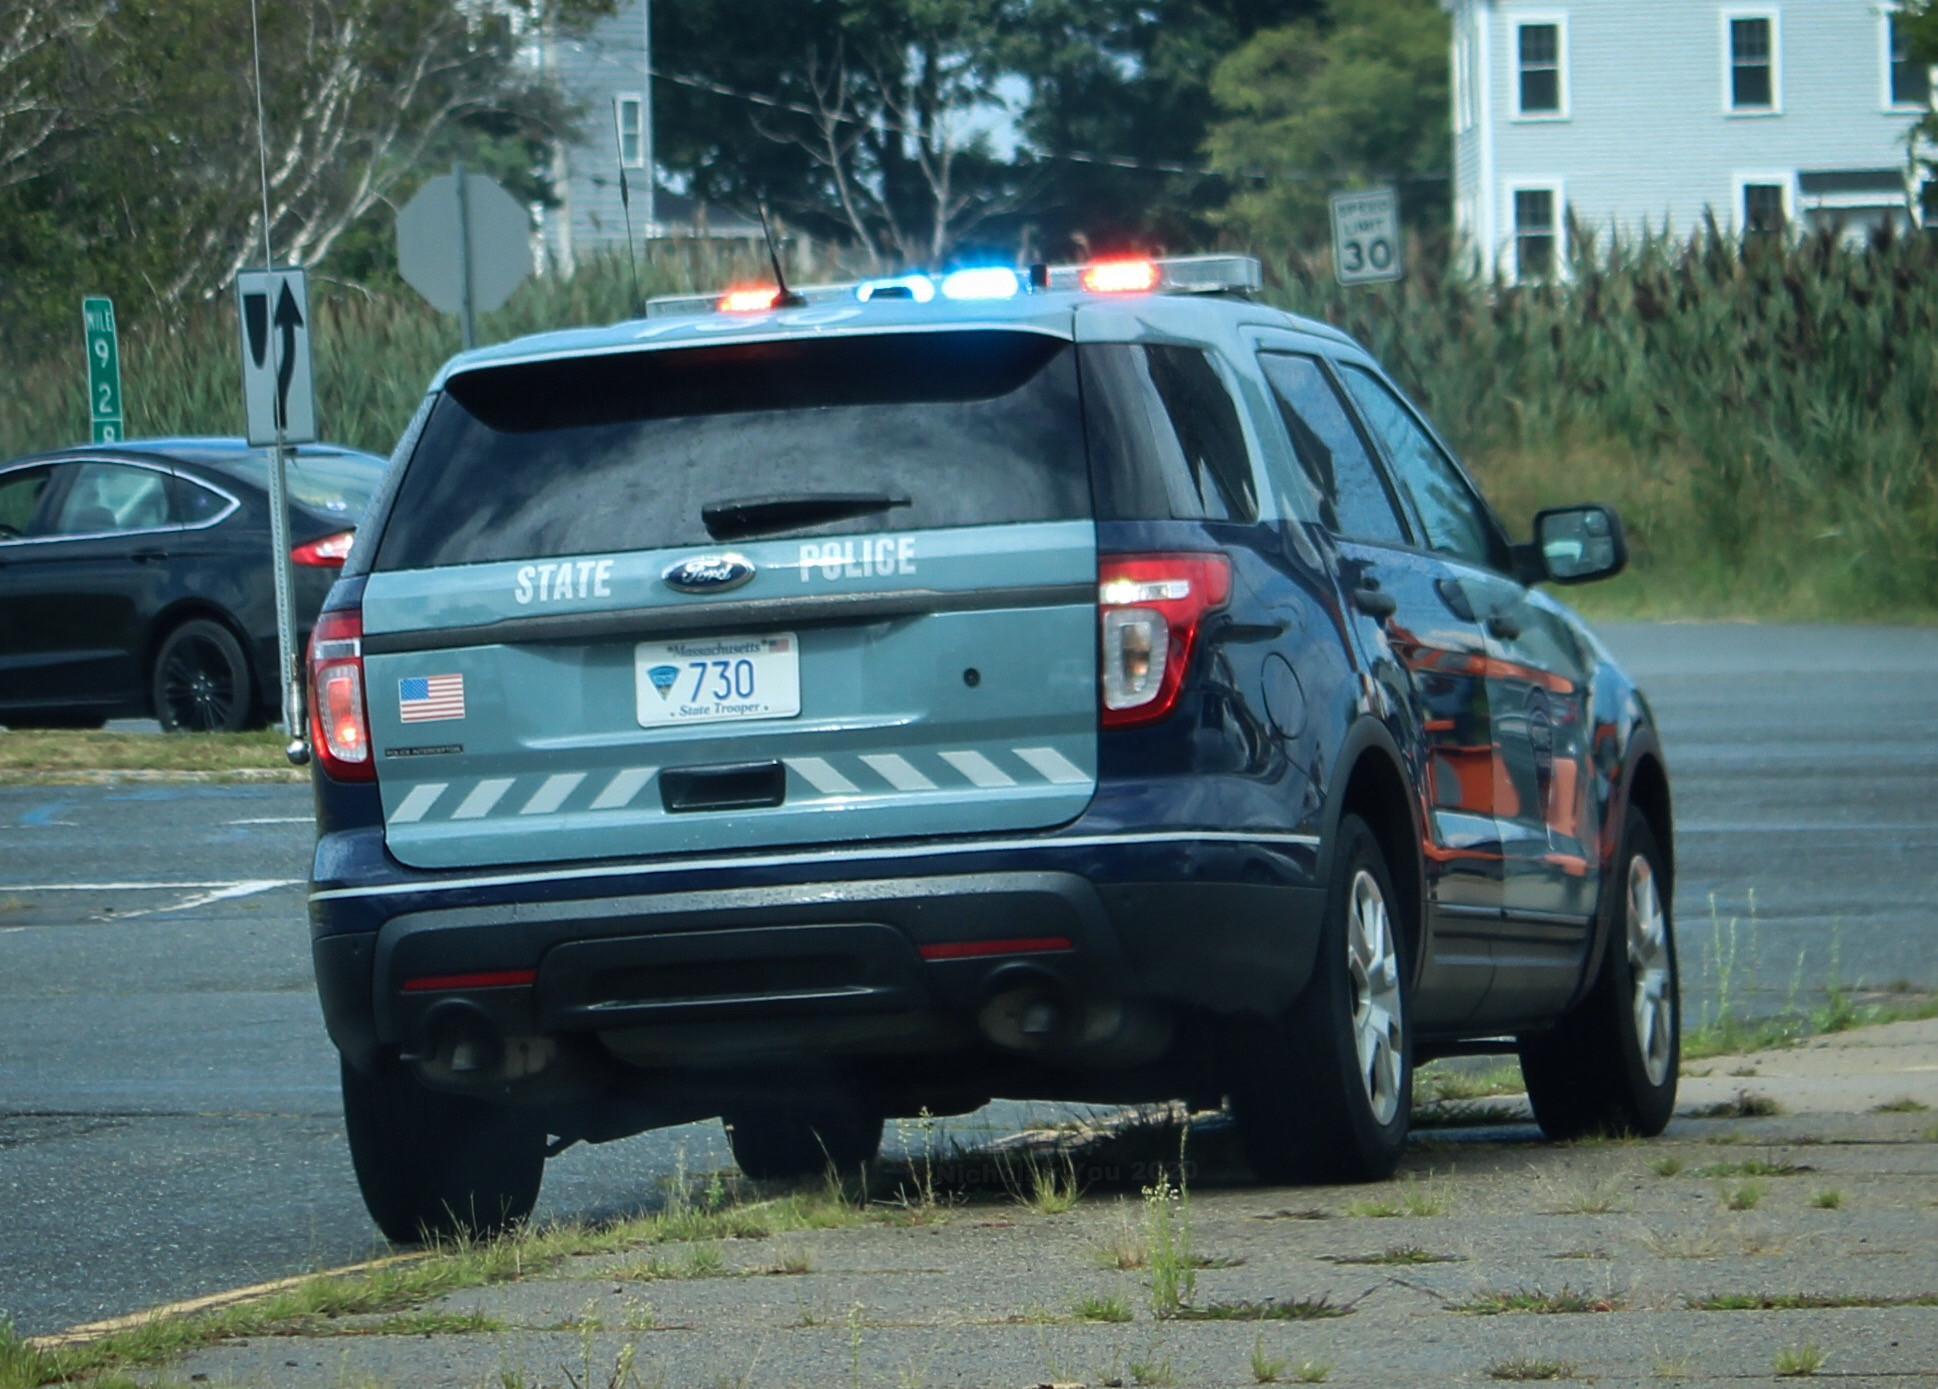 A photo  of Massachusetts State Police
            Cruiser 730, a 2015 Ford Police Interceptor Utility             taken by Nicholas You